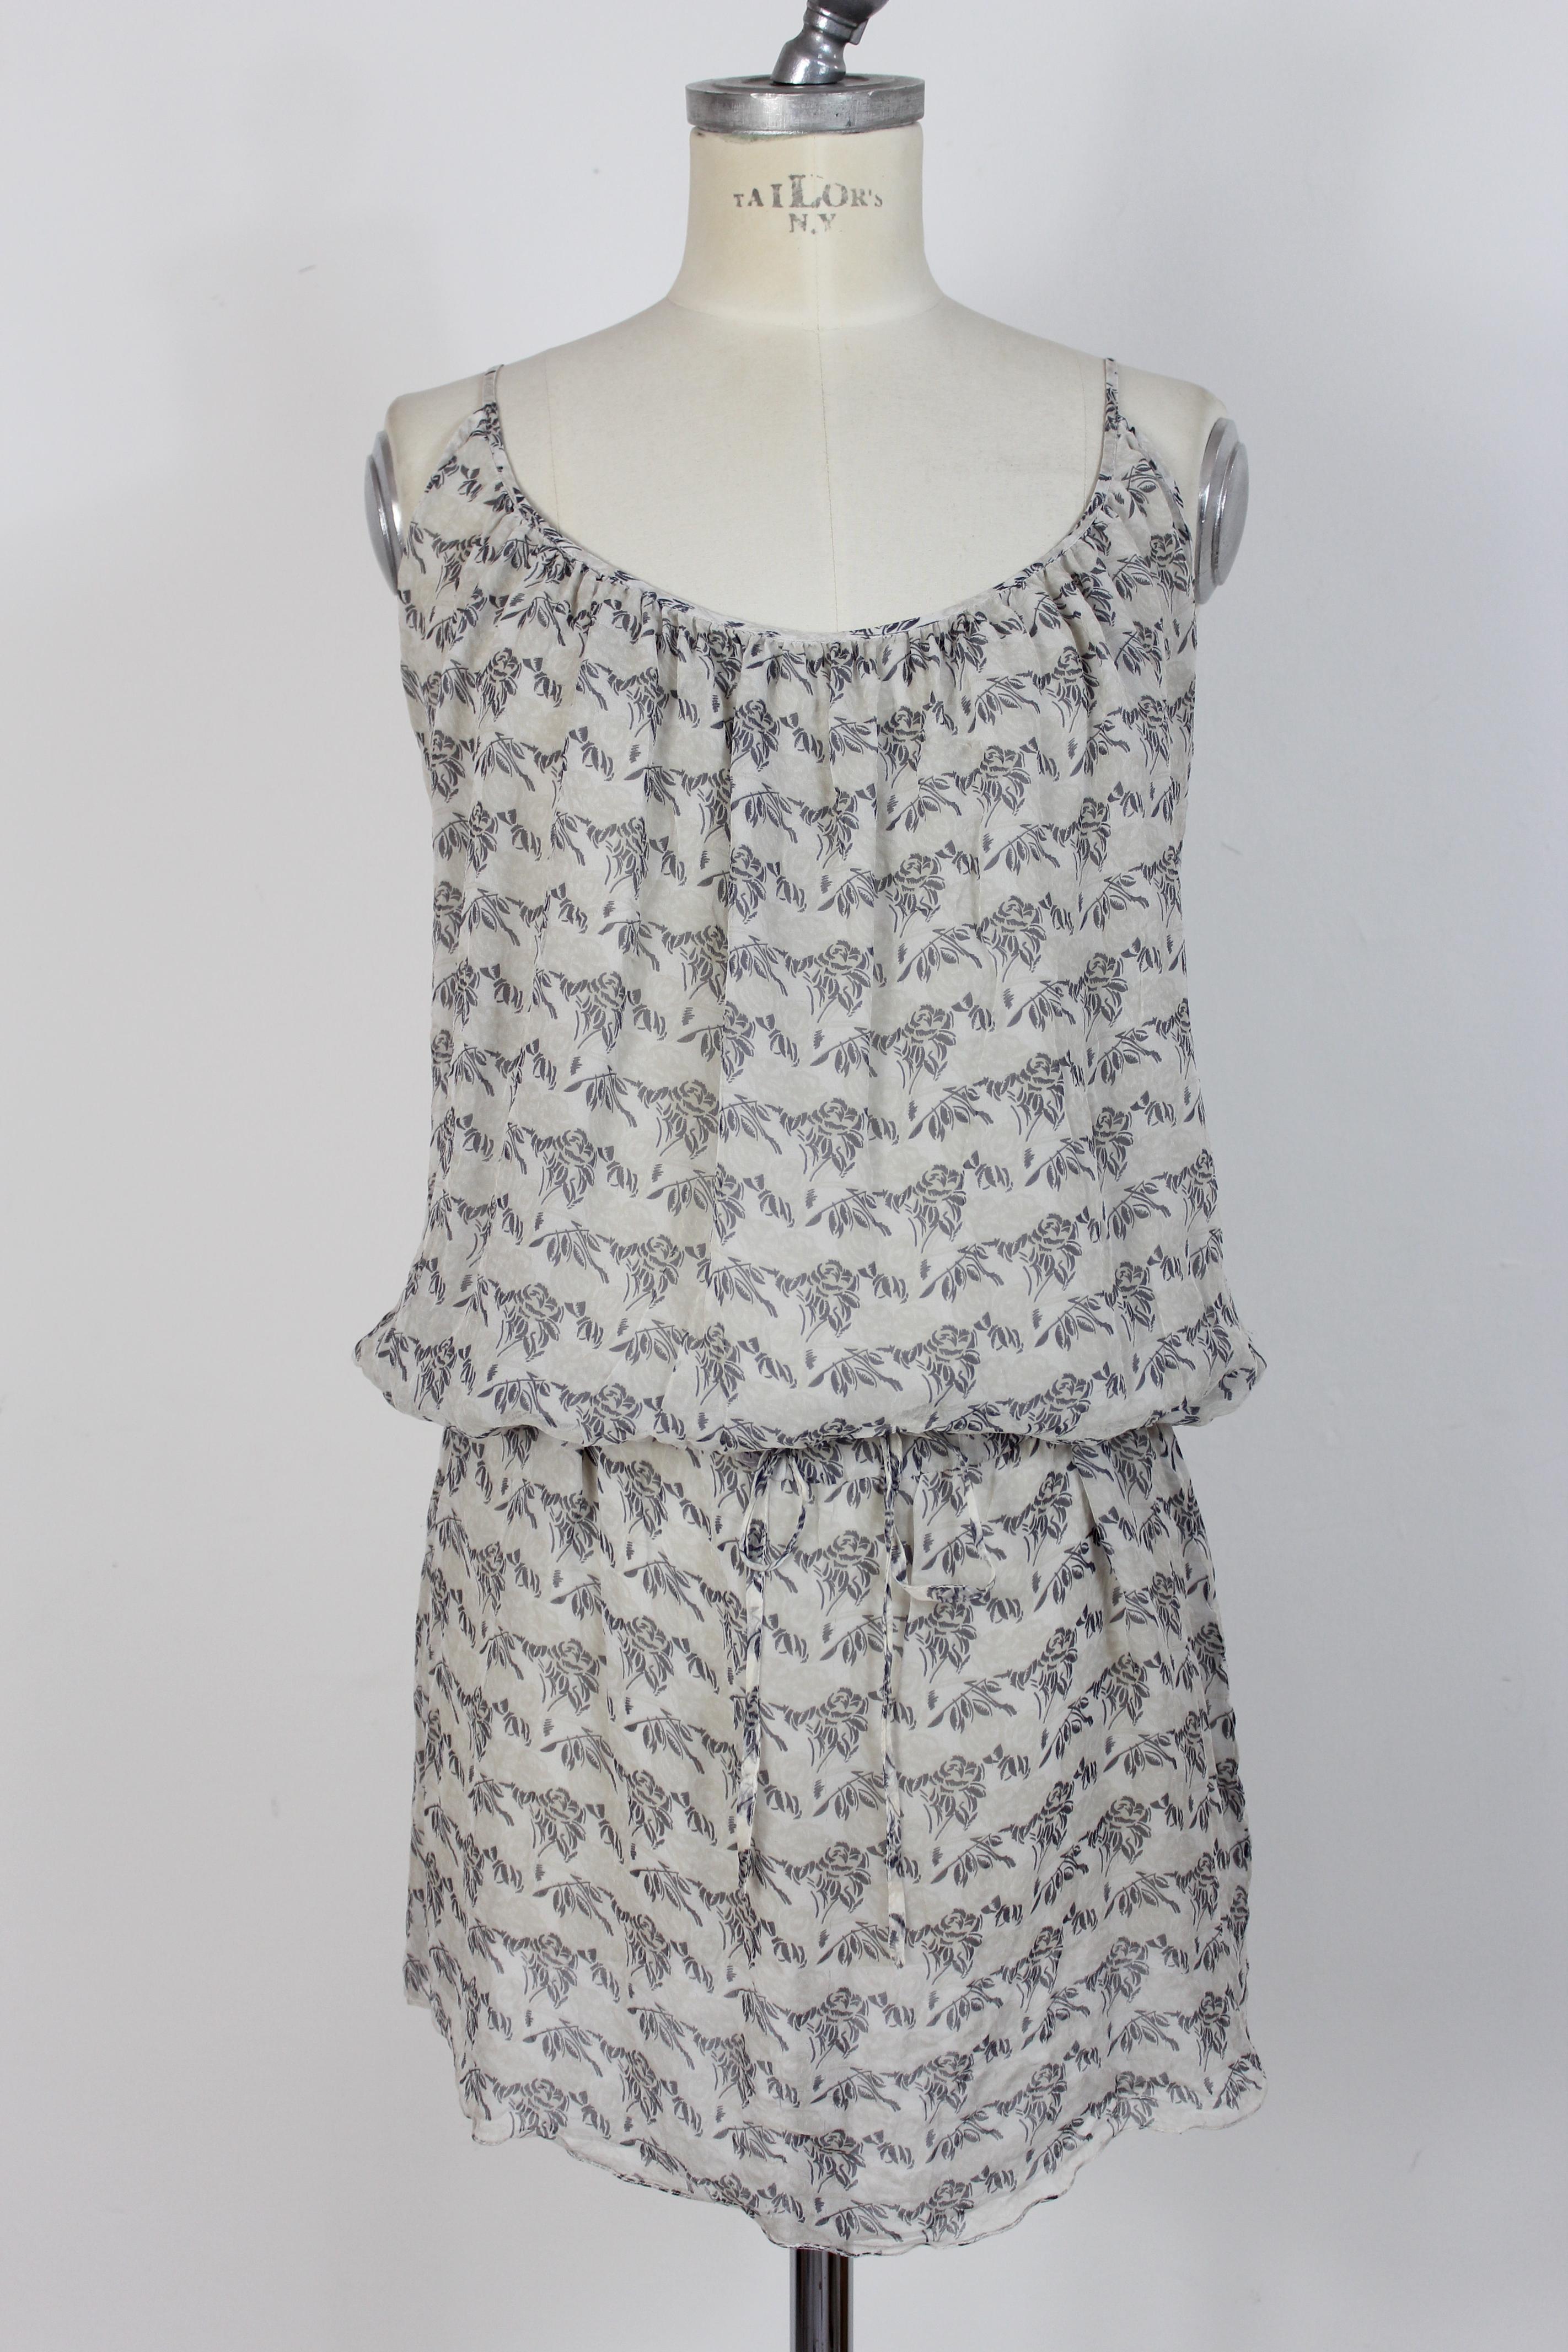 Paco Rabanne 2000s women's dress. Short dress on the knee, soft model, beige and gray with floral designs. Adjustable waist belt. Polyester fabric. Made in Italy.

Condition: Excellent

Item used few times, it remains in its excellent condition.